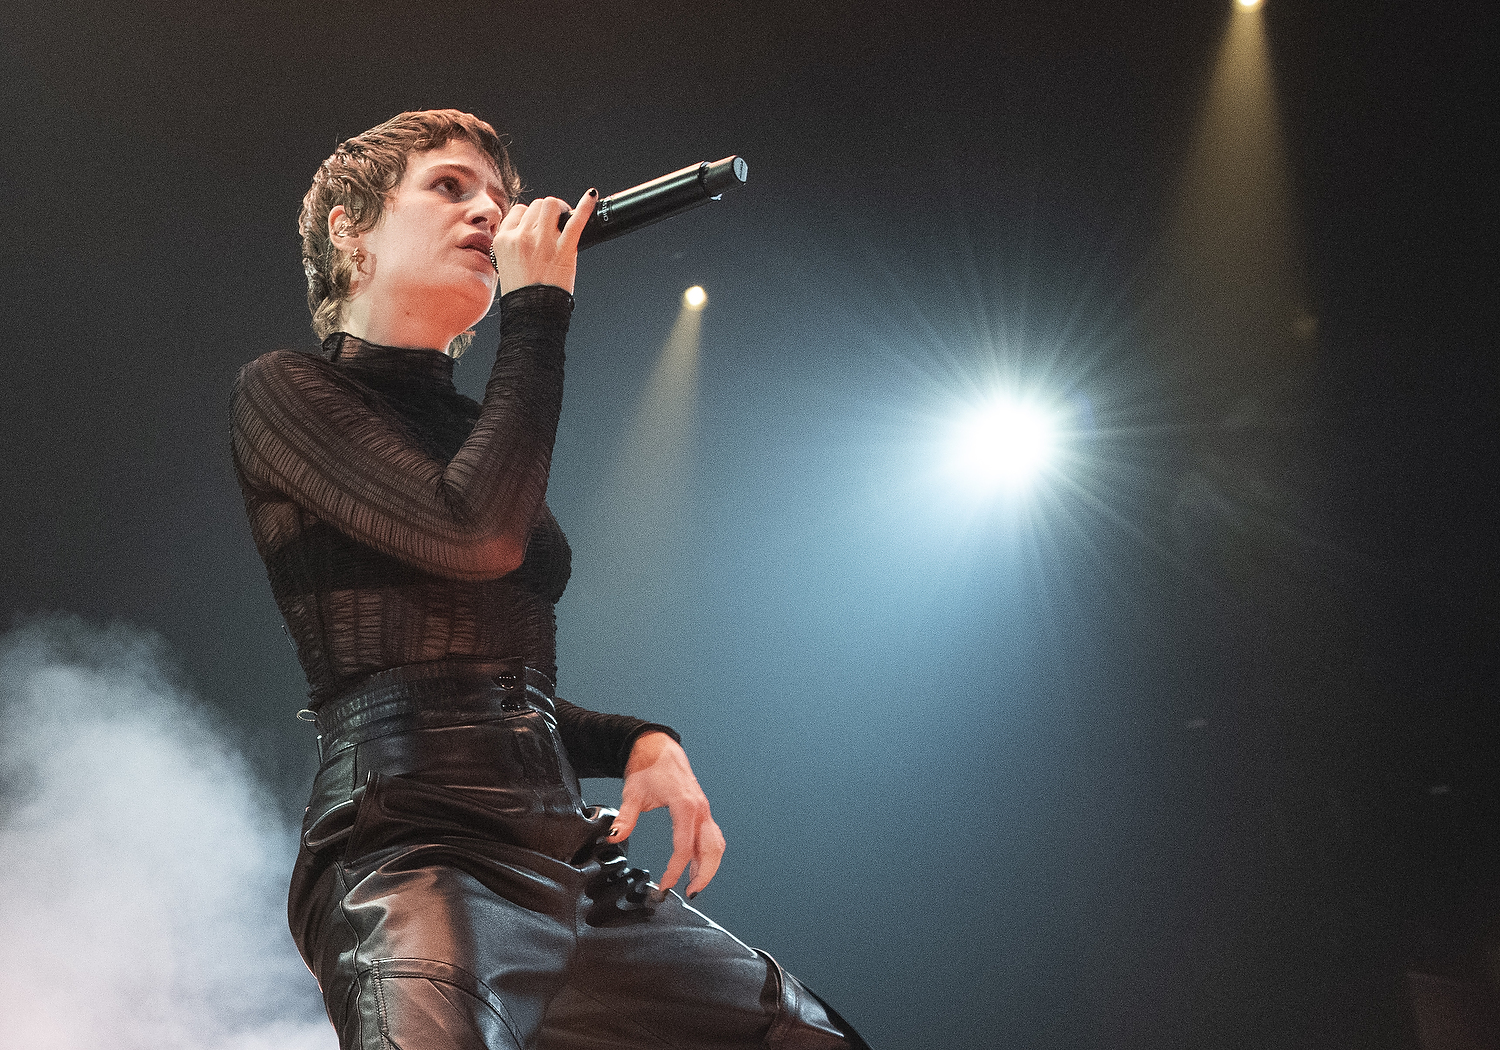 Christine And The Queens |  IMA - International Music Award in der Verti Music Hall in Berlin am 22.11.2019